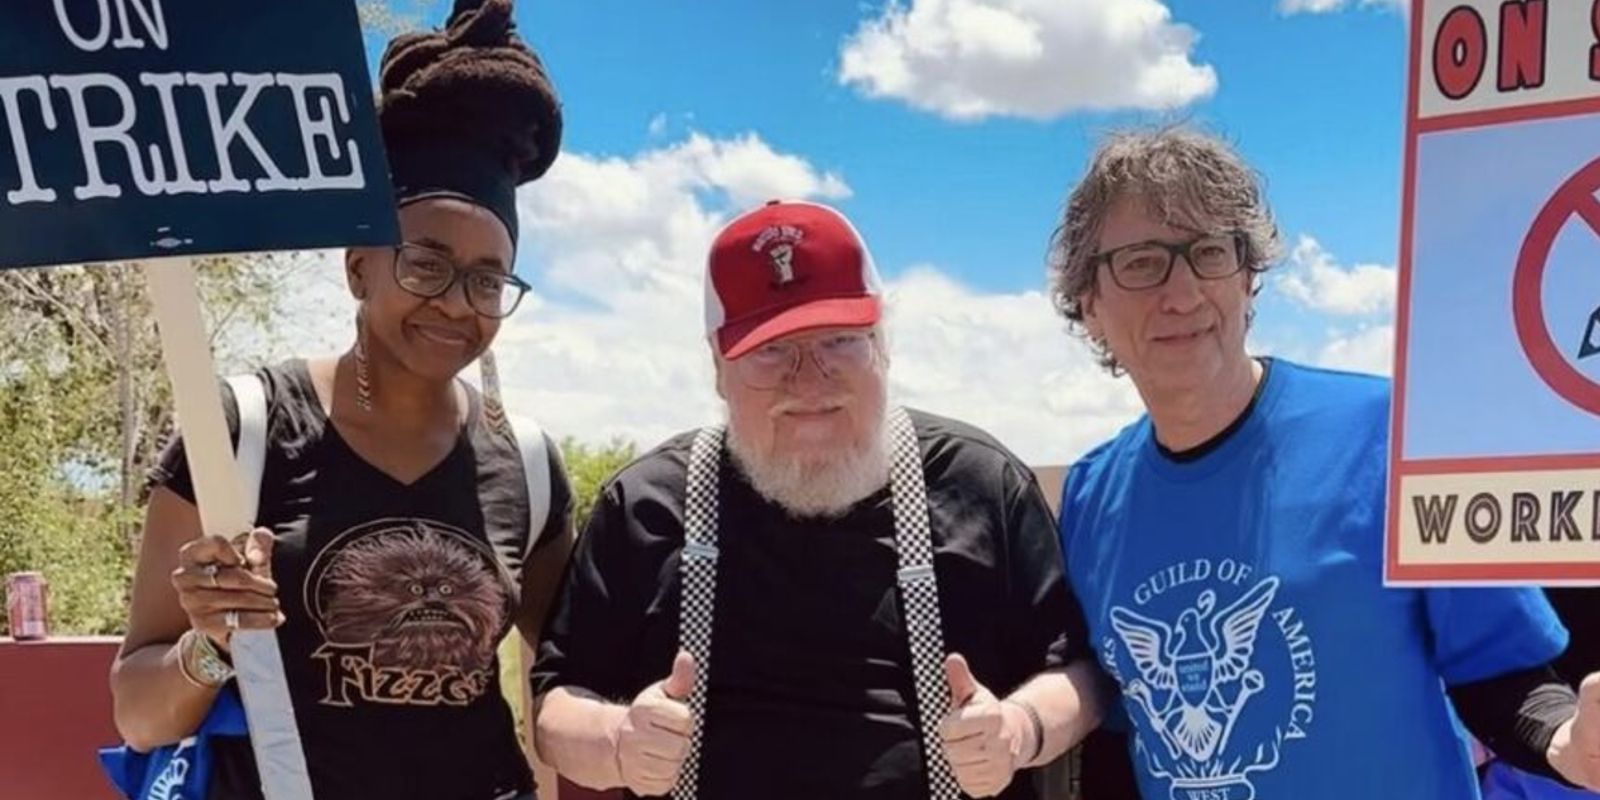 nnedi okorafor, george r.r. martin, and neil gaiman standing at the picket line in support of the wga strike